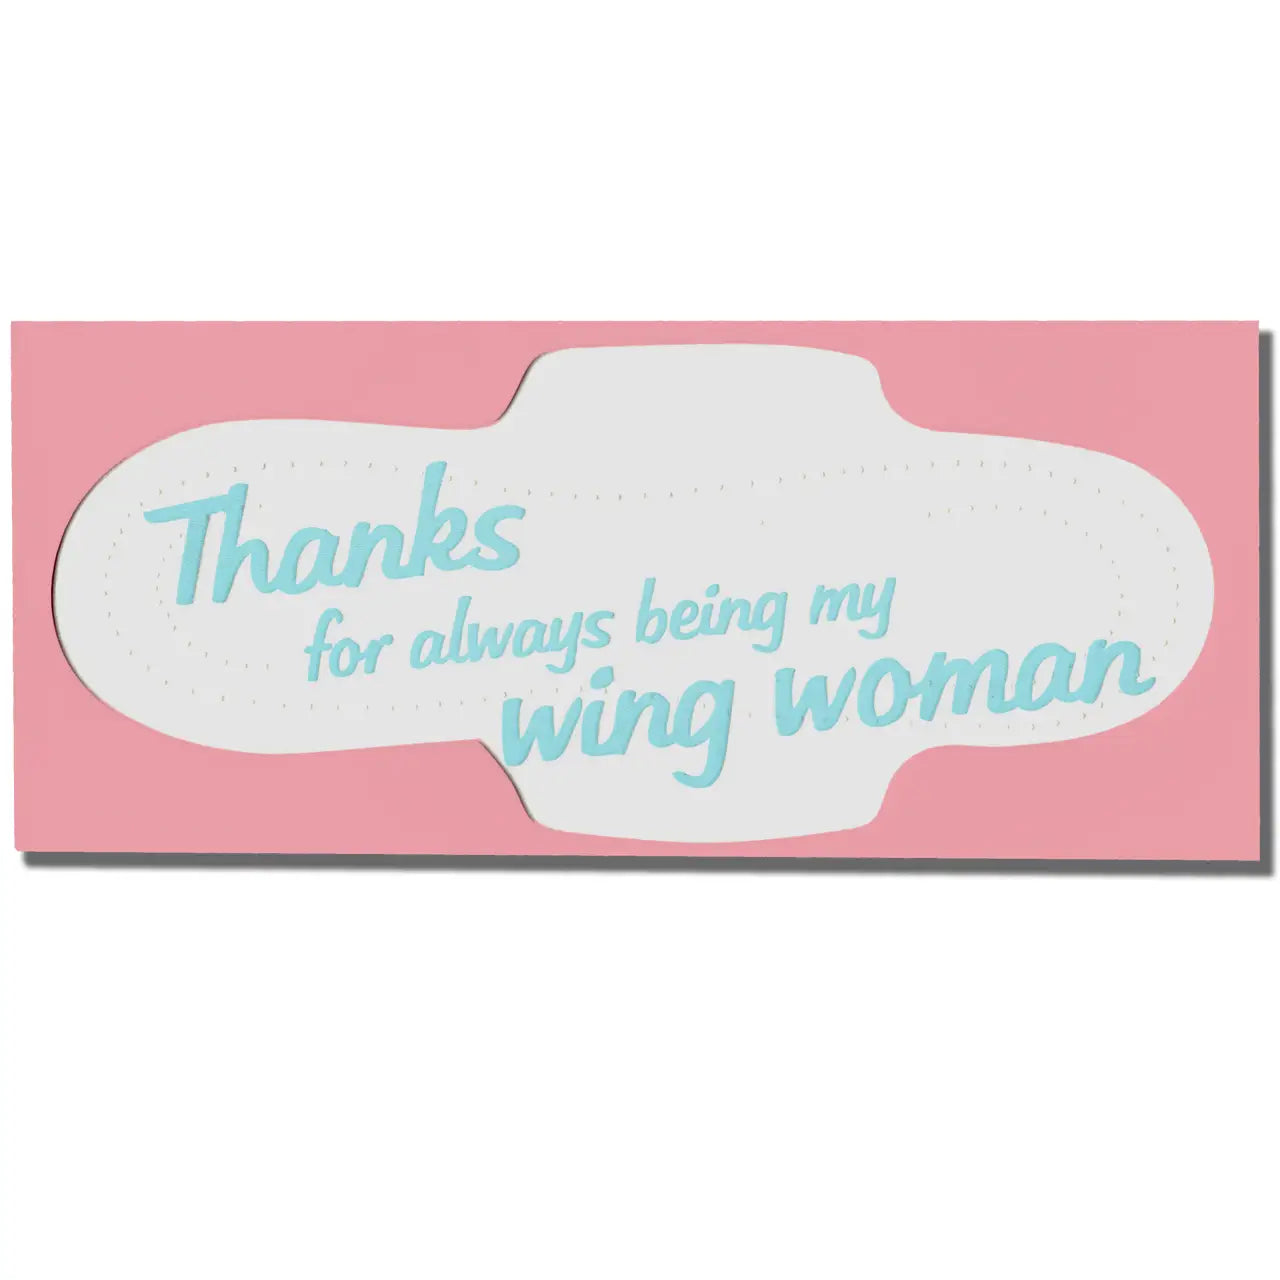 Wing Woman Thank You - Greeting Card - Power and Light Press